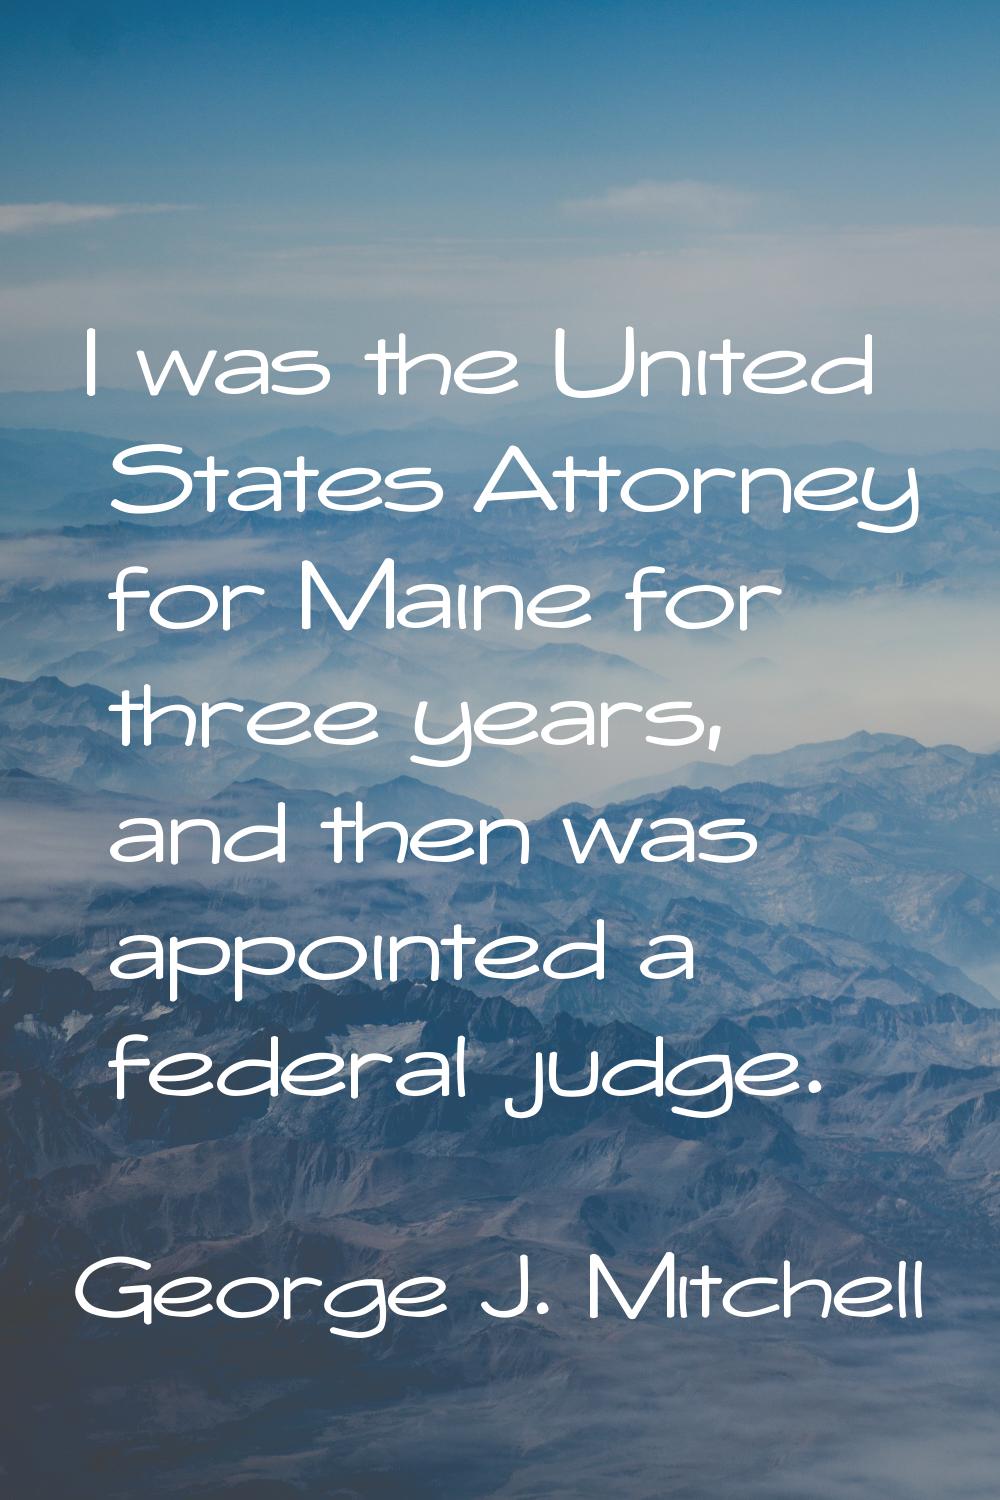 I was the United States Attorney for Maine for three years, and then was appointed a federal judge.